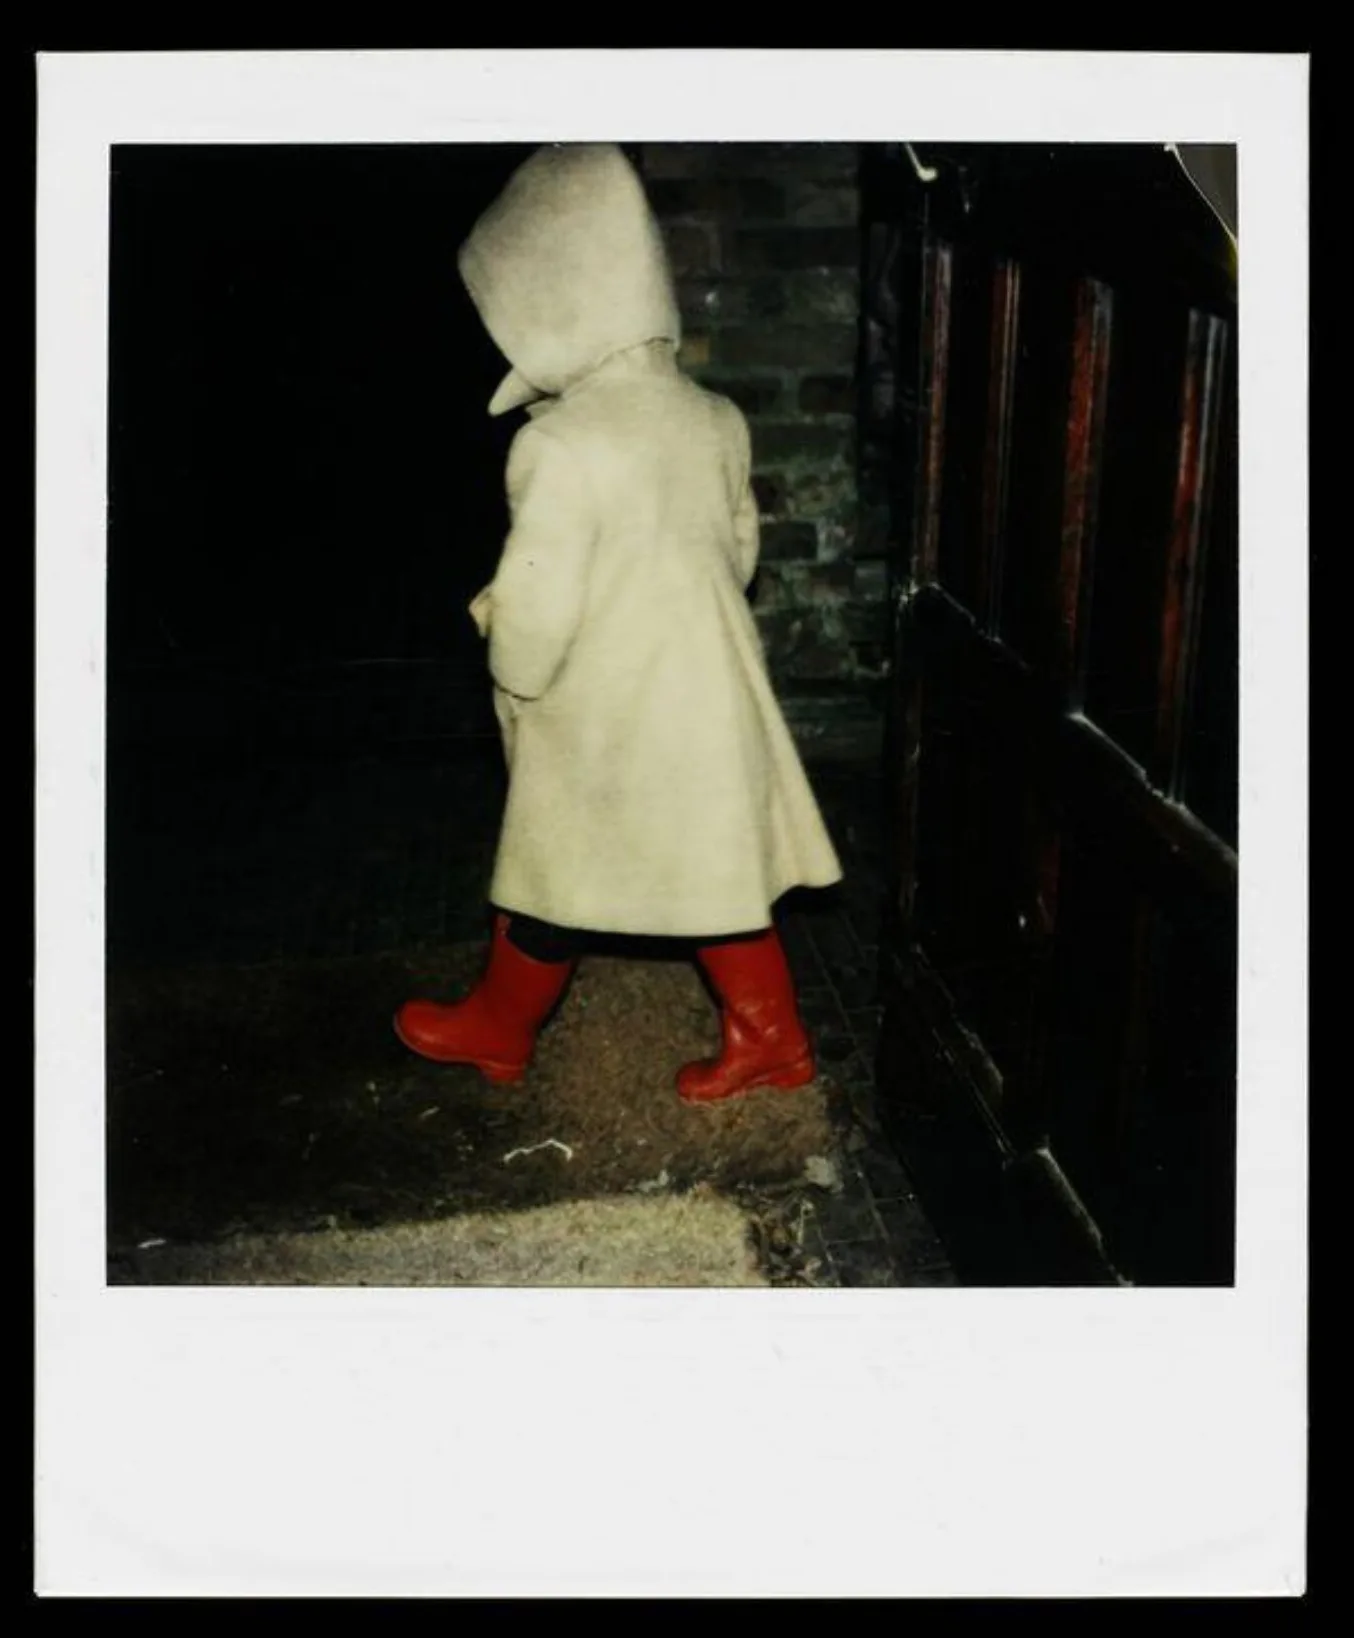 Polaroid depicting a child walking away from the camera wearing a white coat with hood up and red wellies